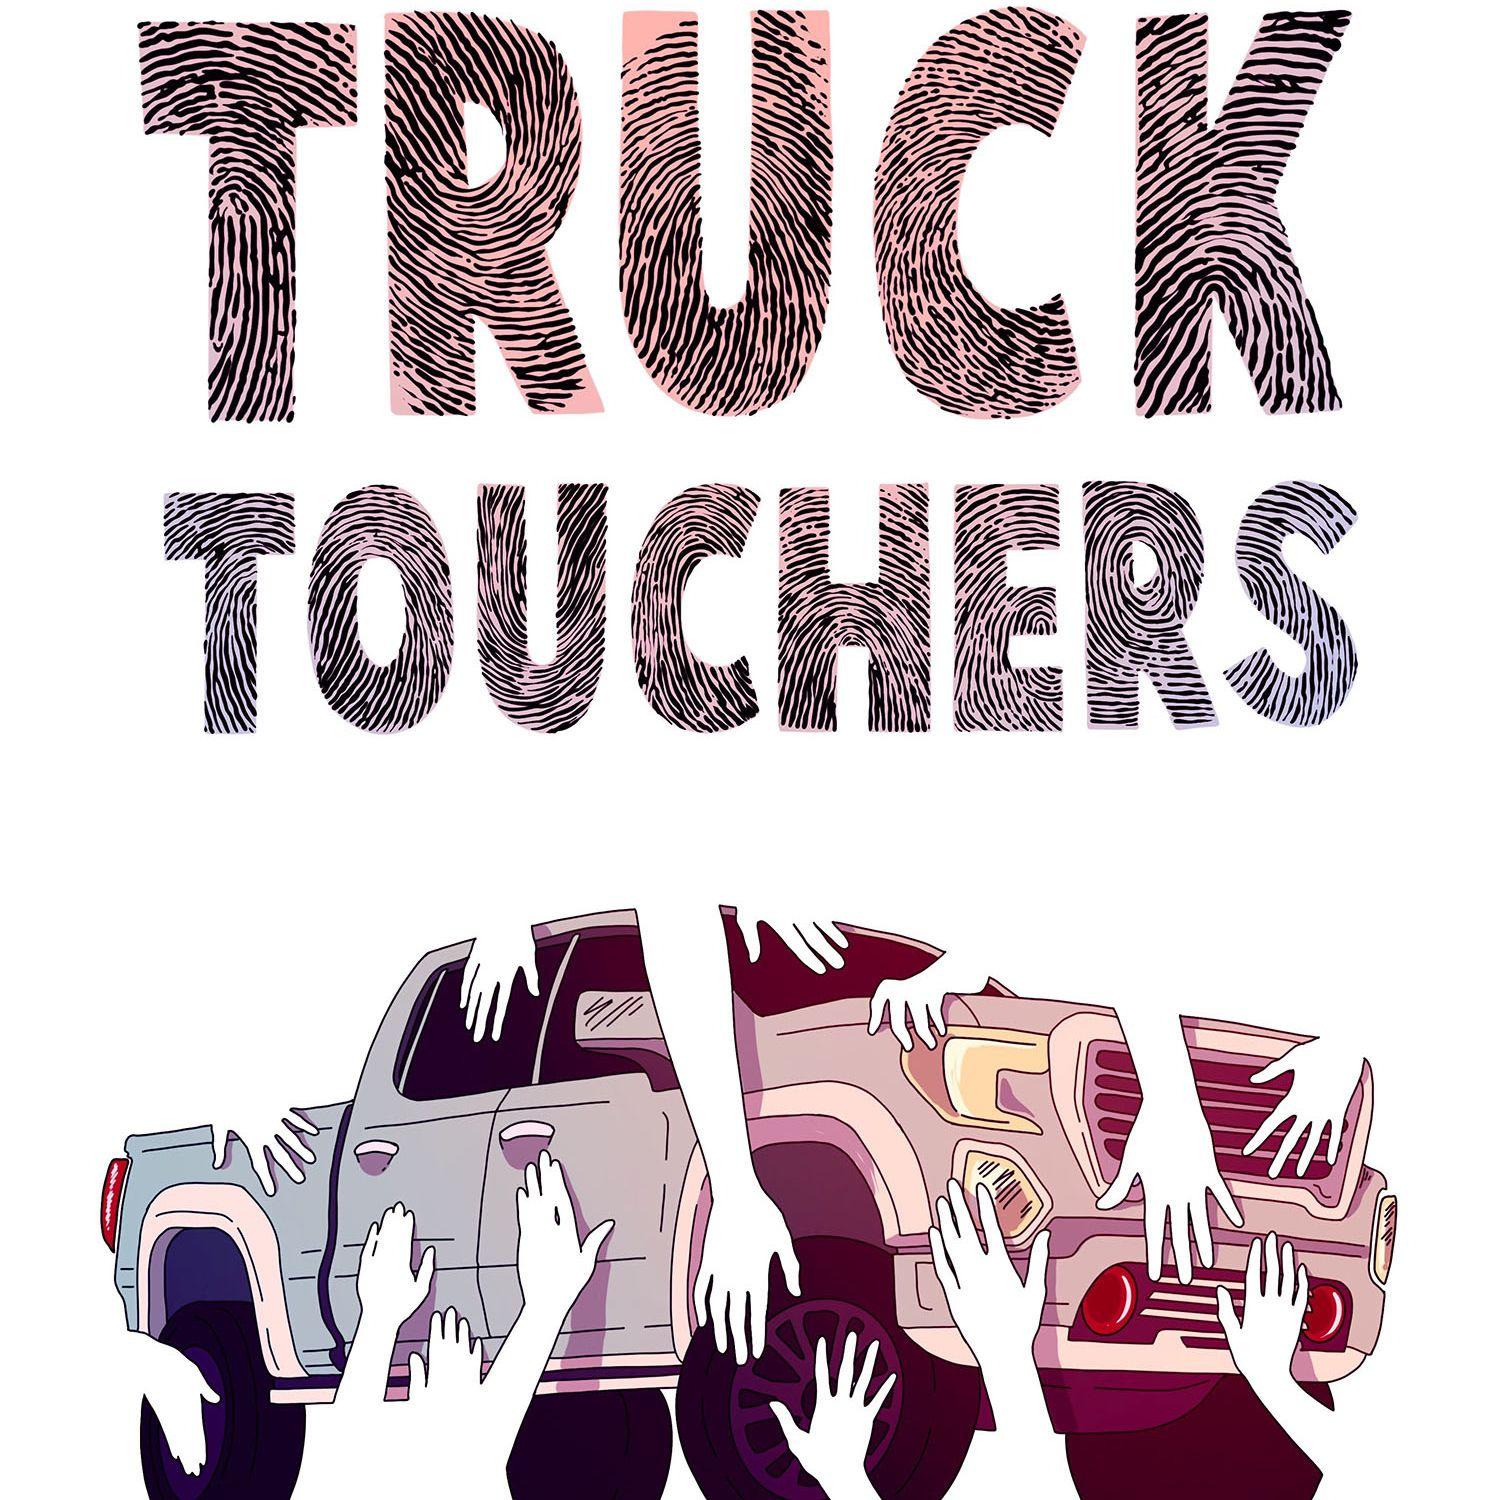 Thumbnail for "236 - Truck Touchers".